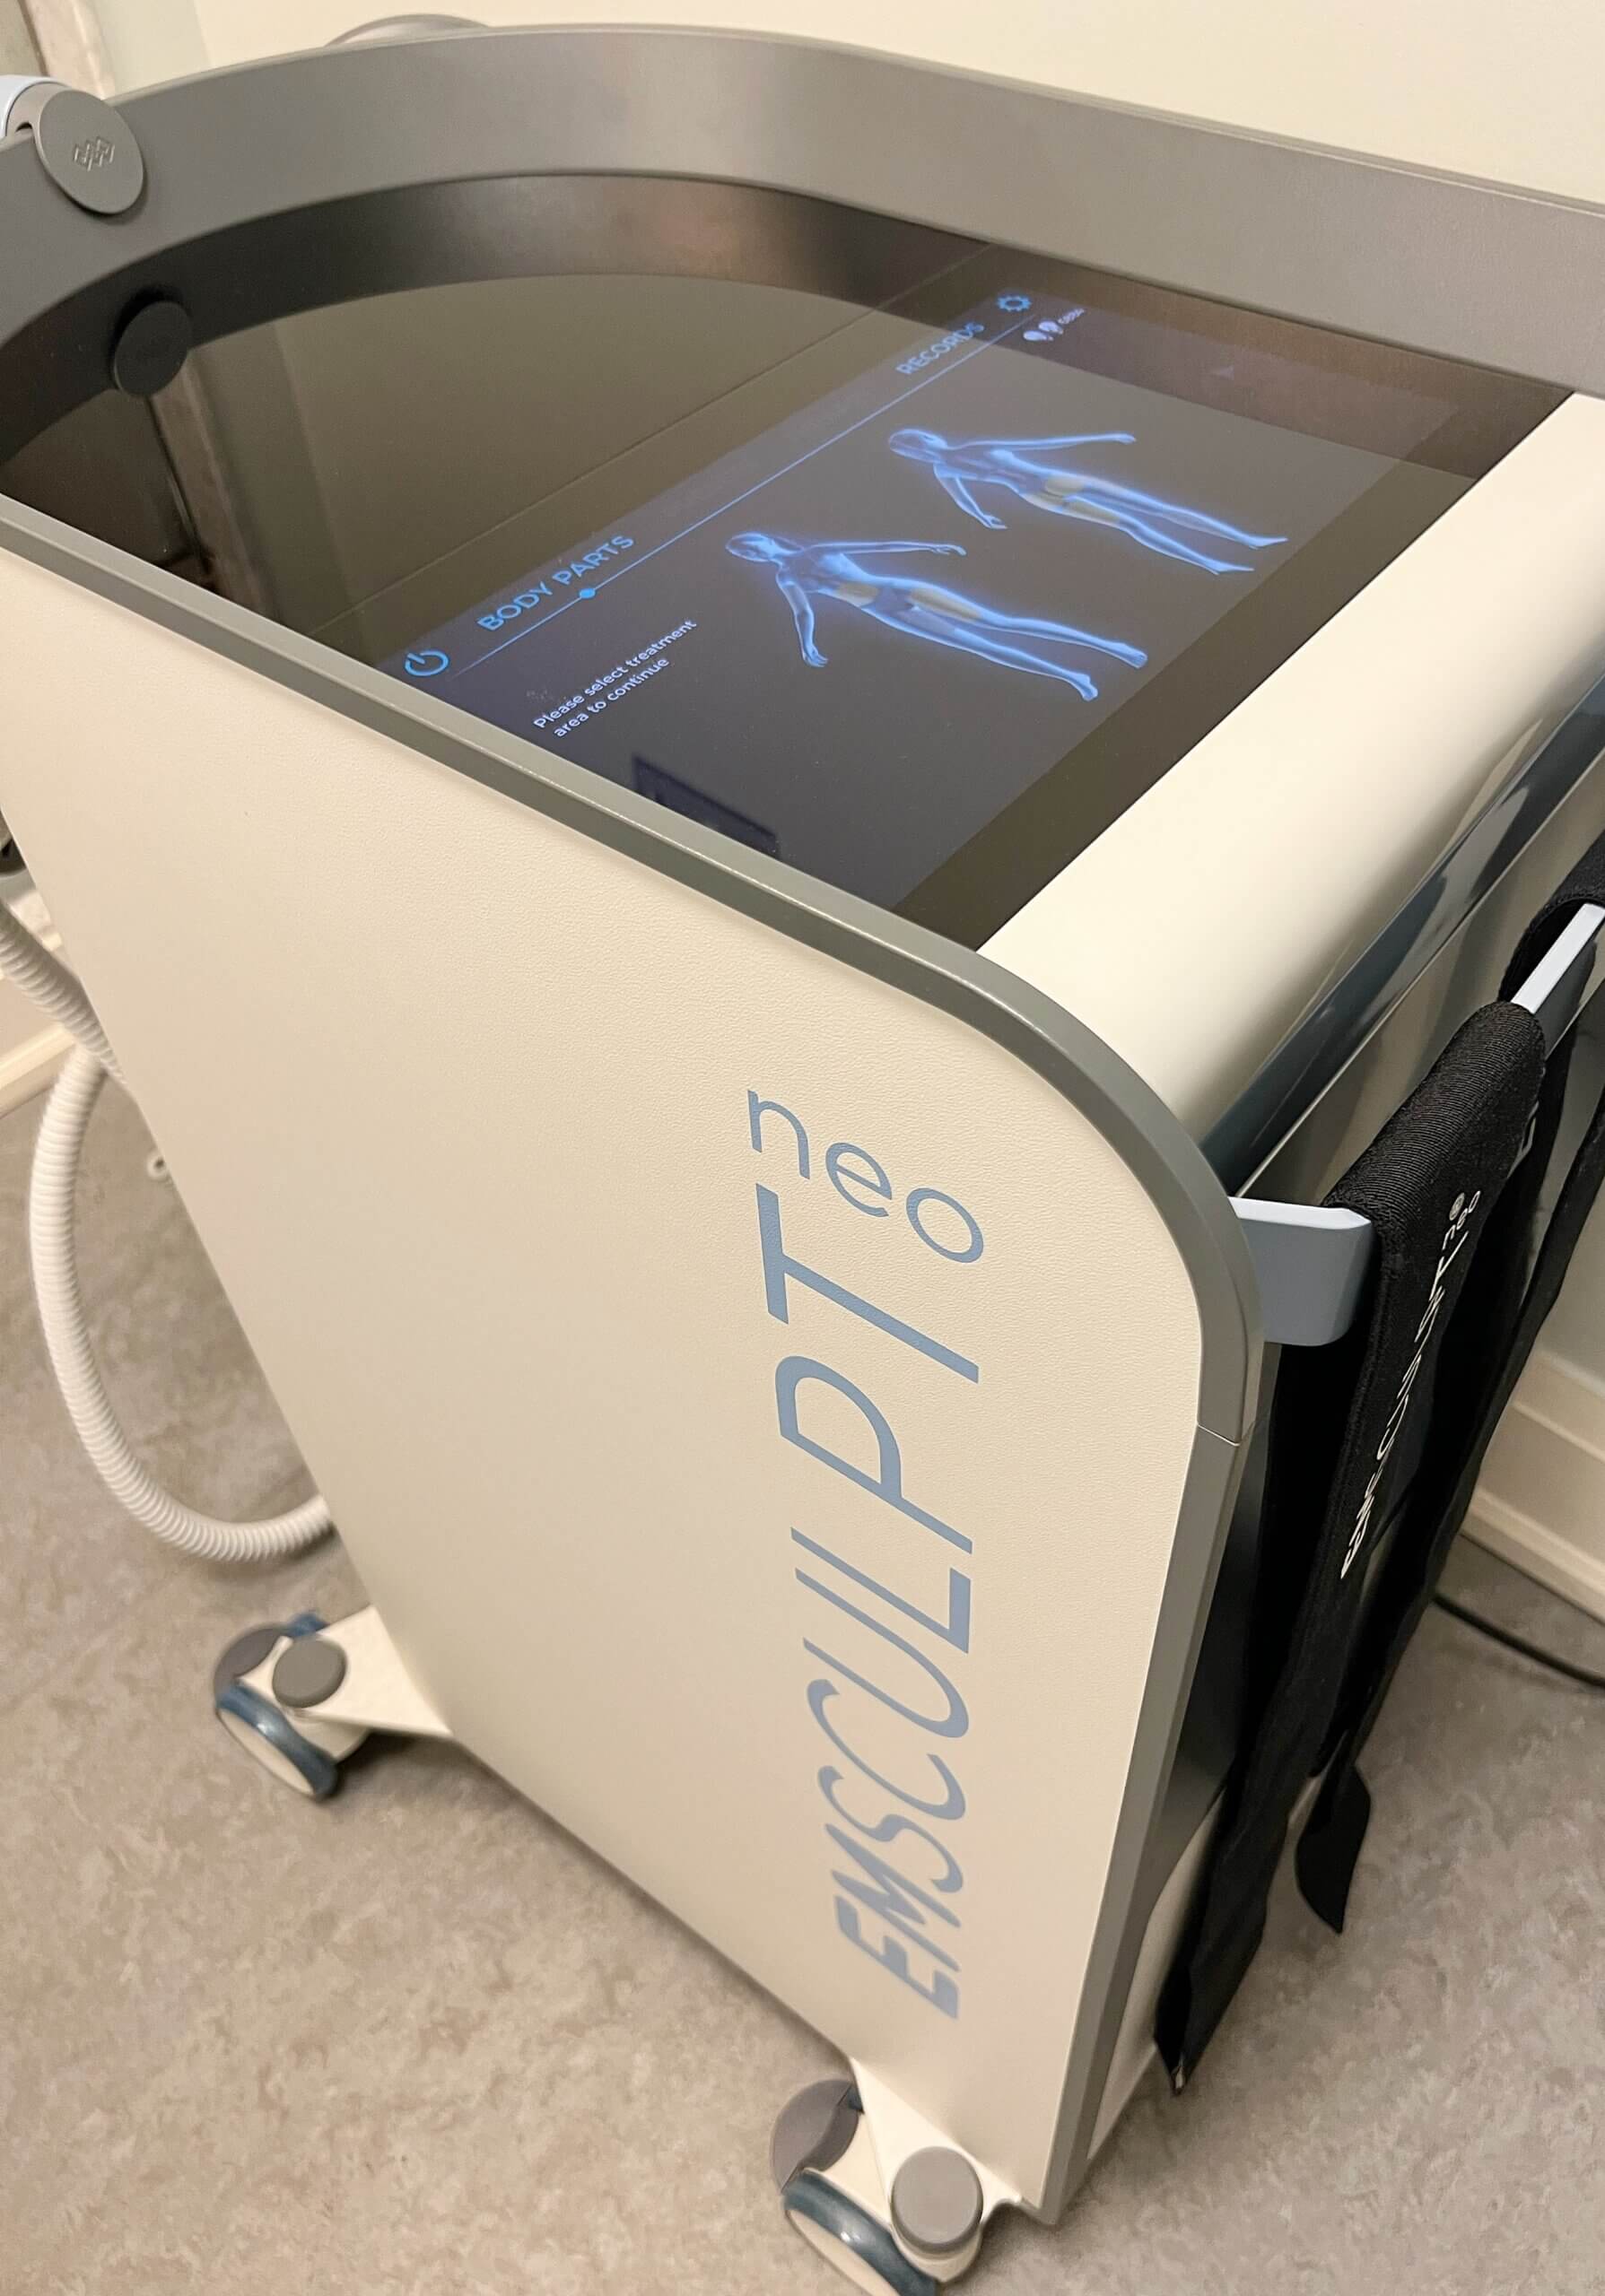 My Emsculpt NEO Experience at DLK on Avenue